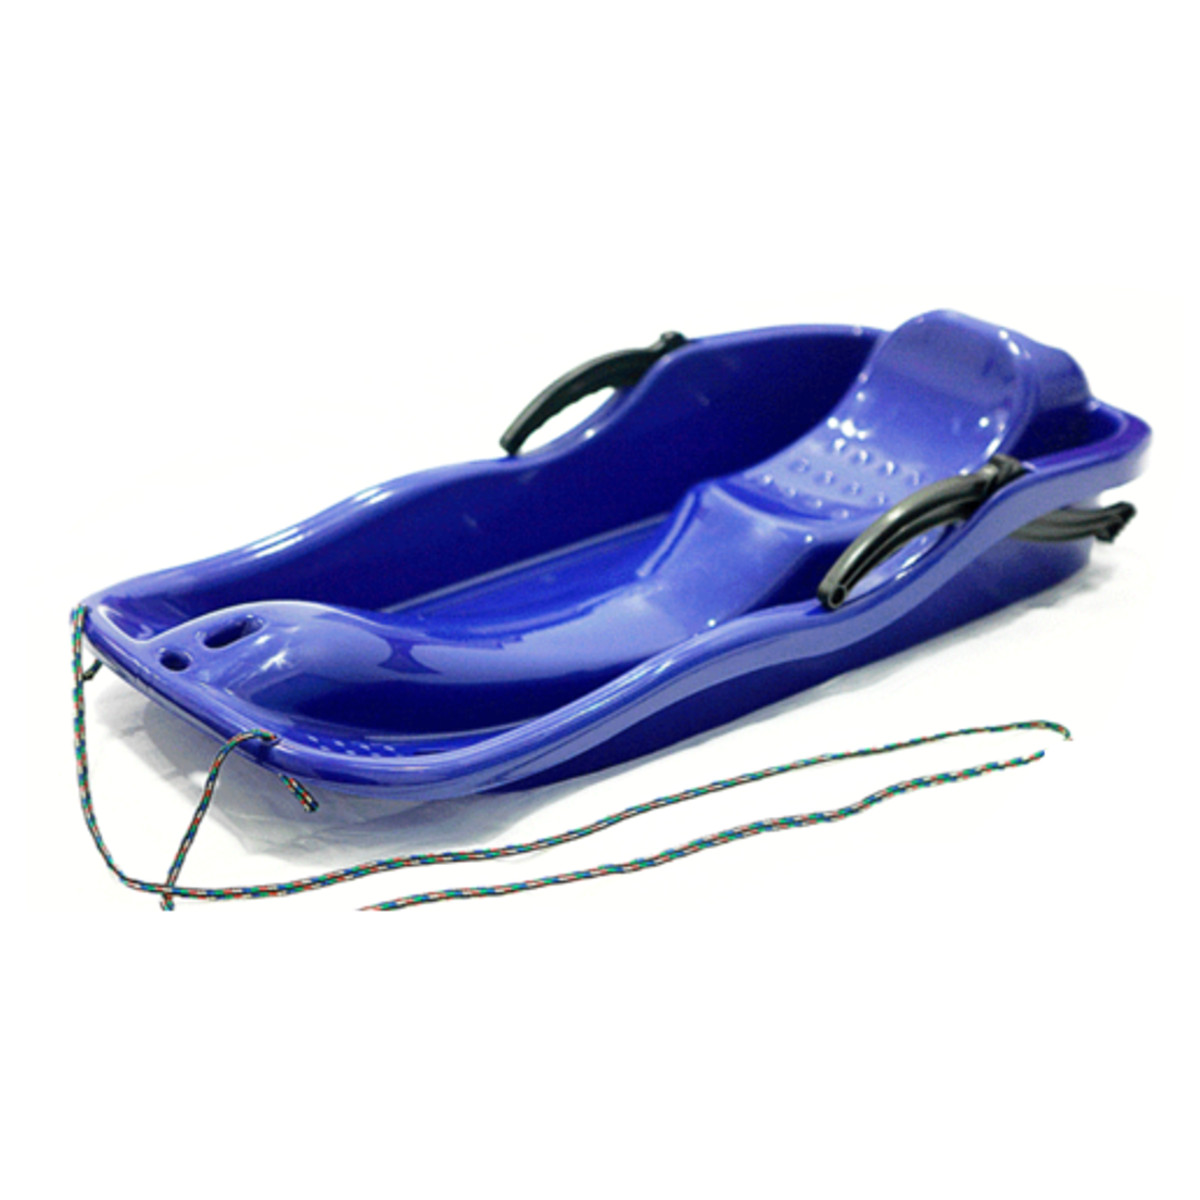 Outdoor-Plastic-Skiing-Board-Sled-Luge-Snow-Grass-Sand-Board-Pad-With-Rope-For-Double-People-1355099